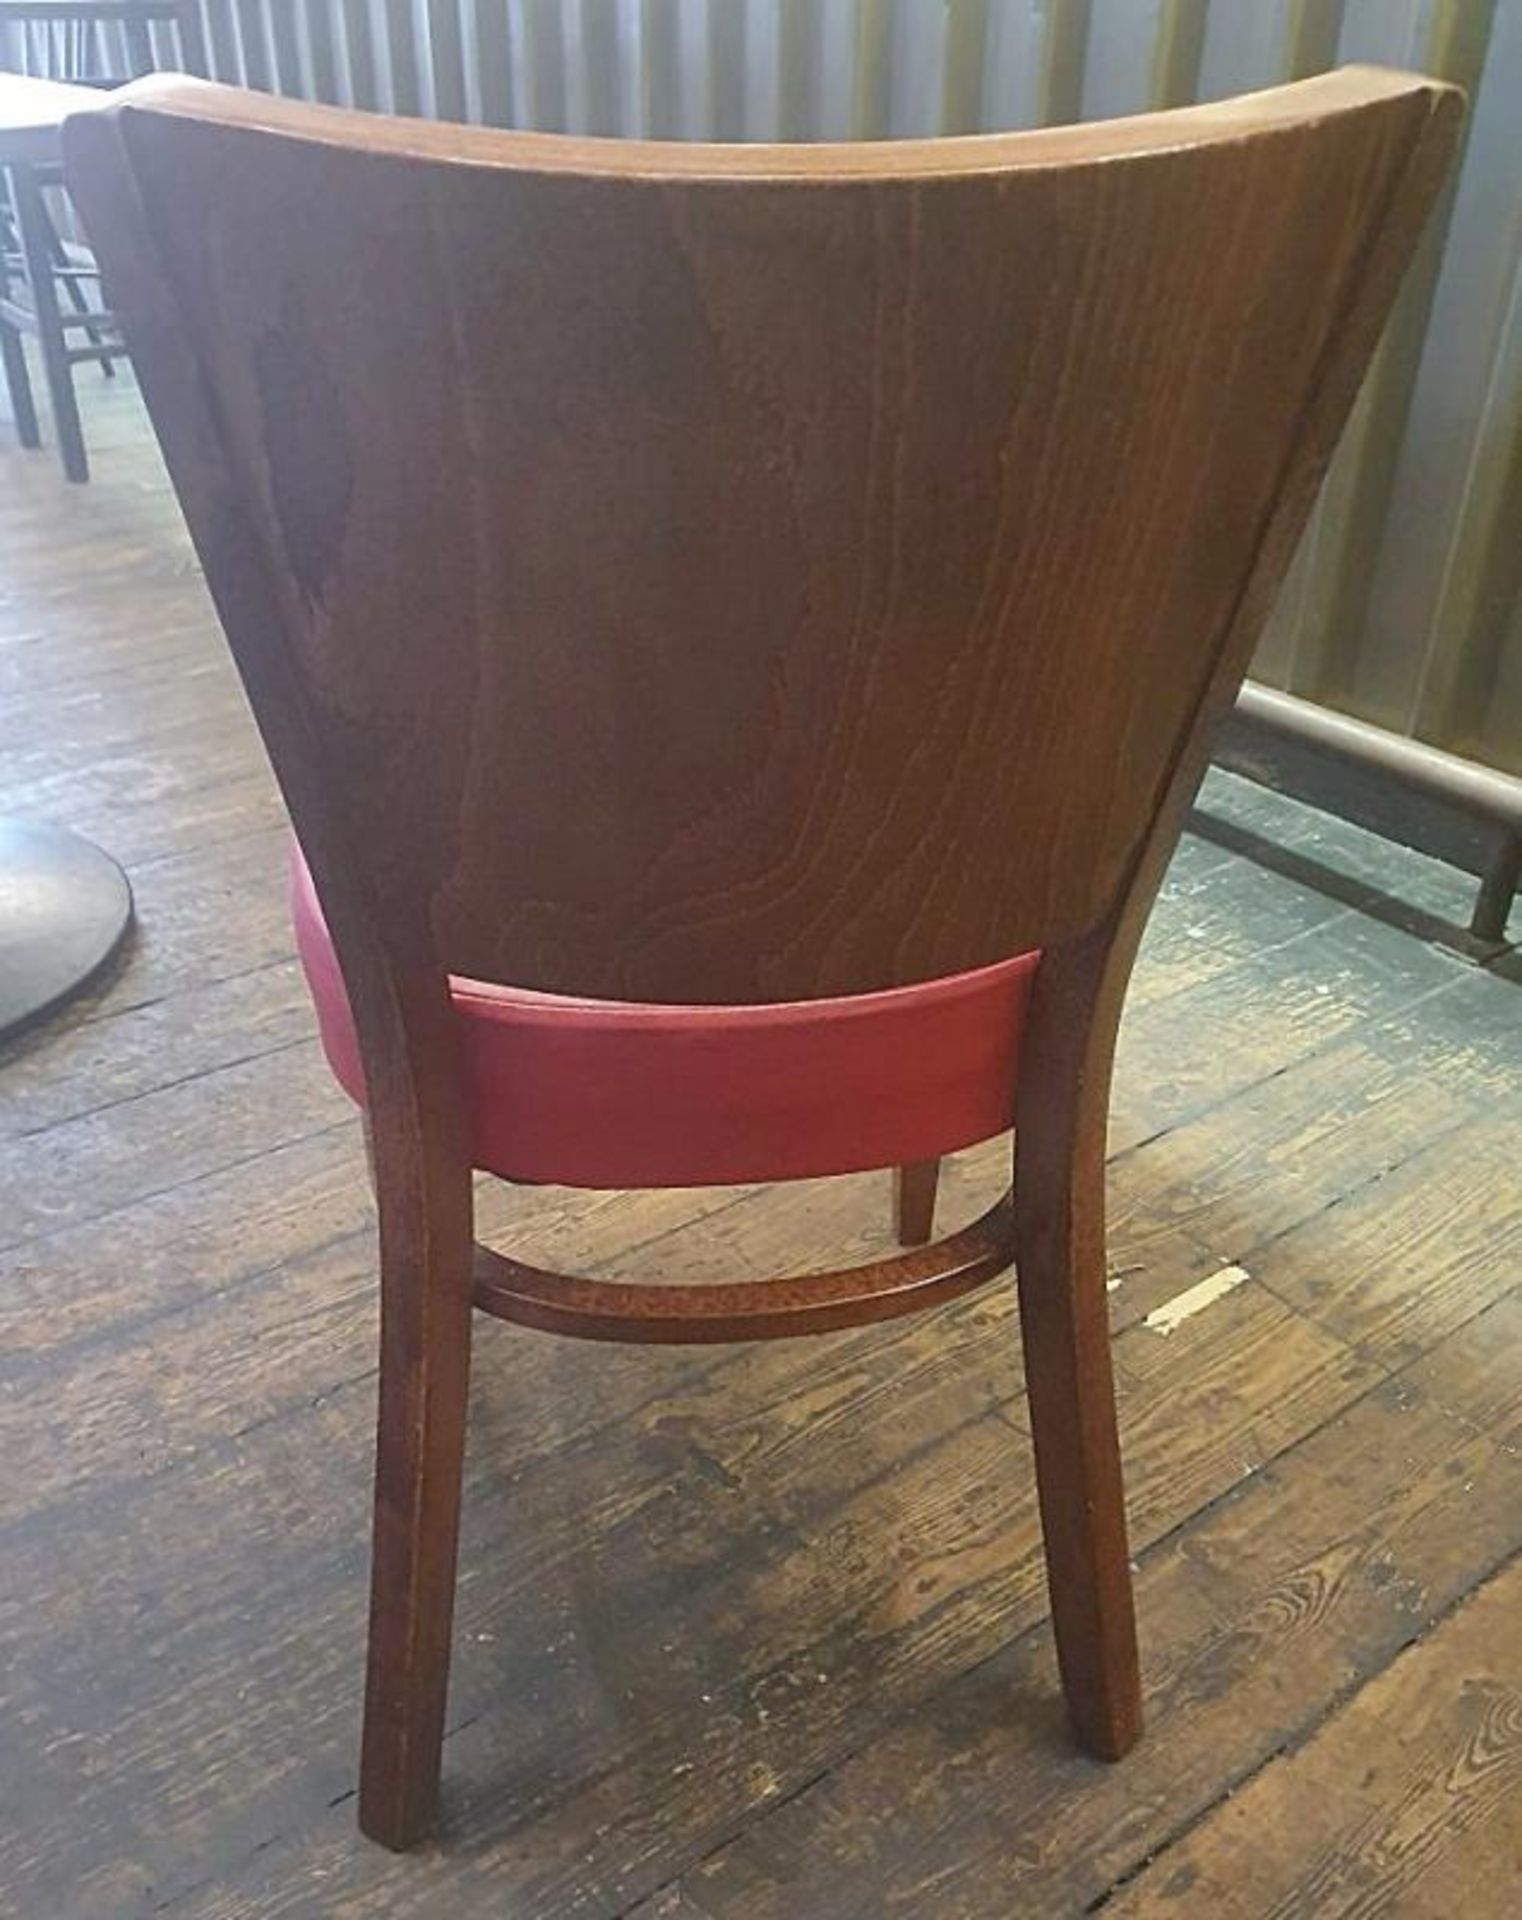 6 x Wooden Dining Chairs With Upholstered Seat Cushions In Red - Recently Taken From A Contemporary - Bild 3 aus 6